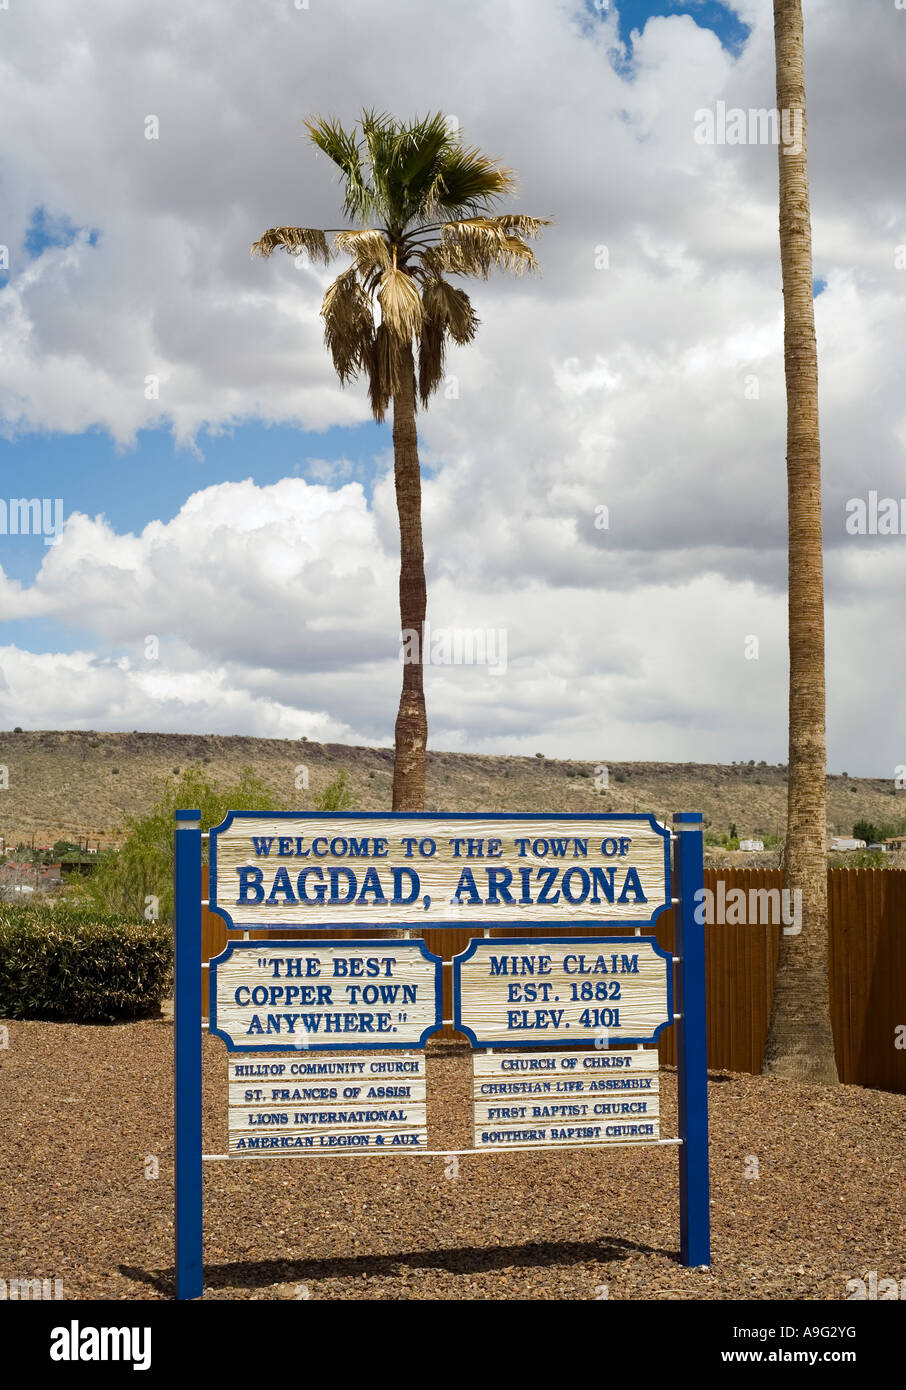 Sign welcoming visitors to the city of Bagdad Arizona Stock Photo